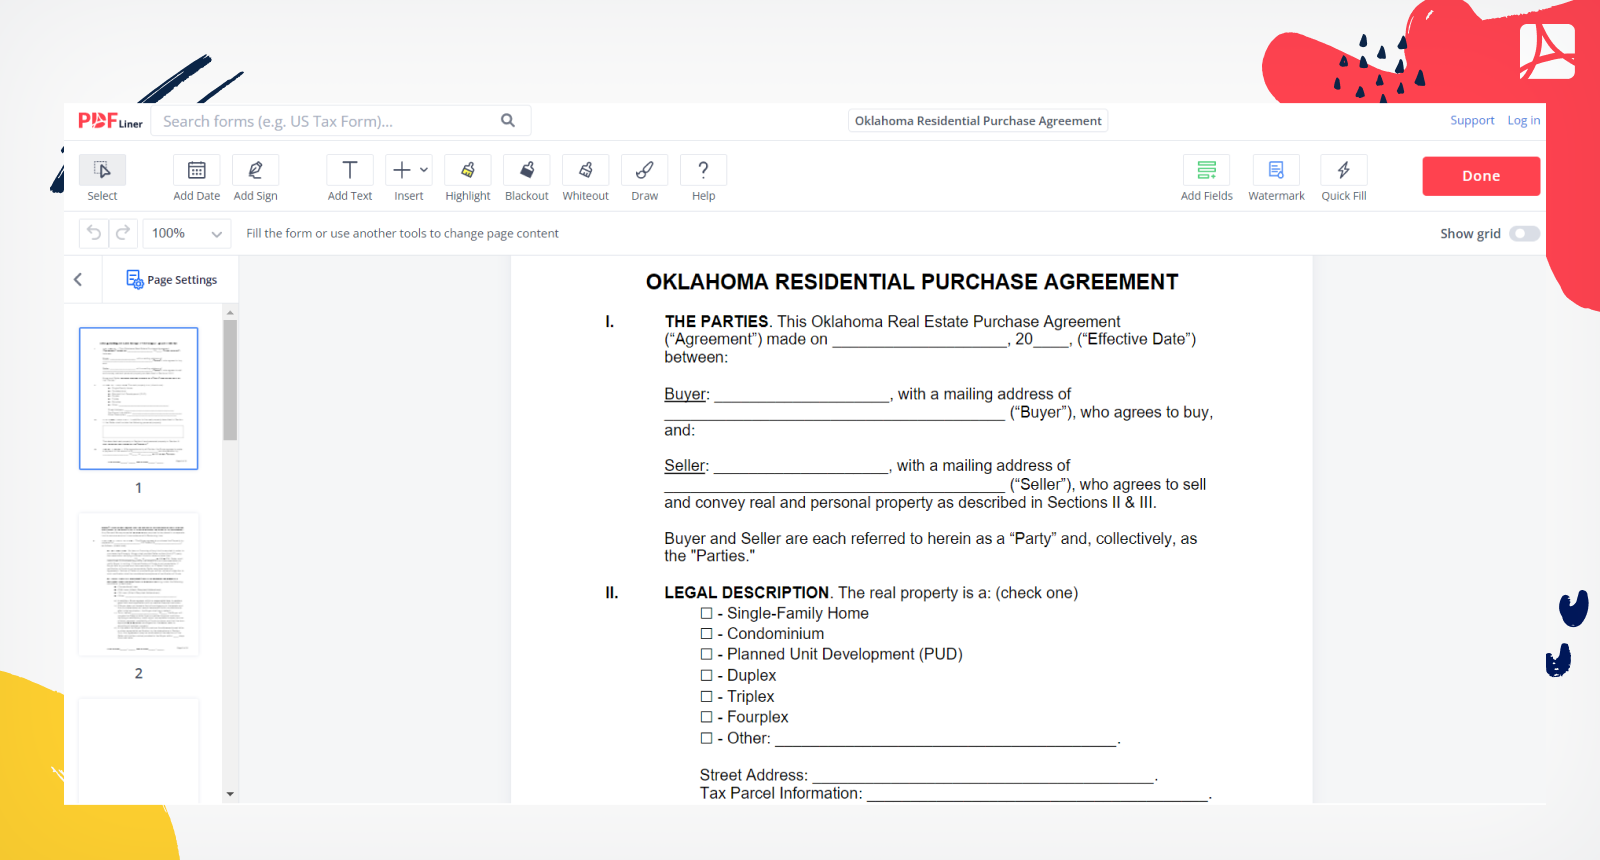 Oklahoma Residential Purchase Agreement Form Screenshot